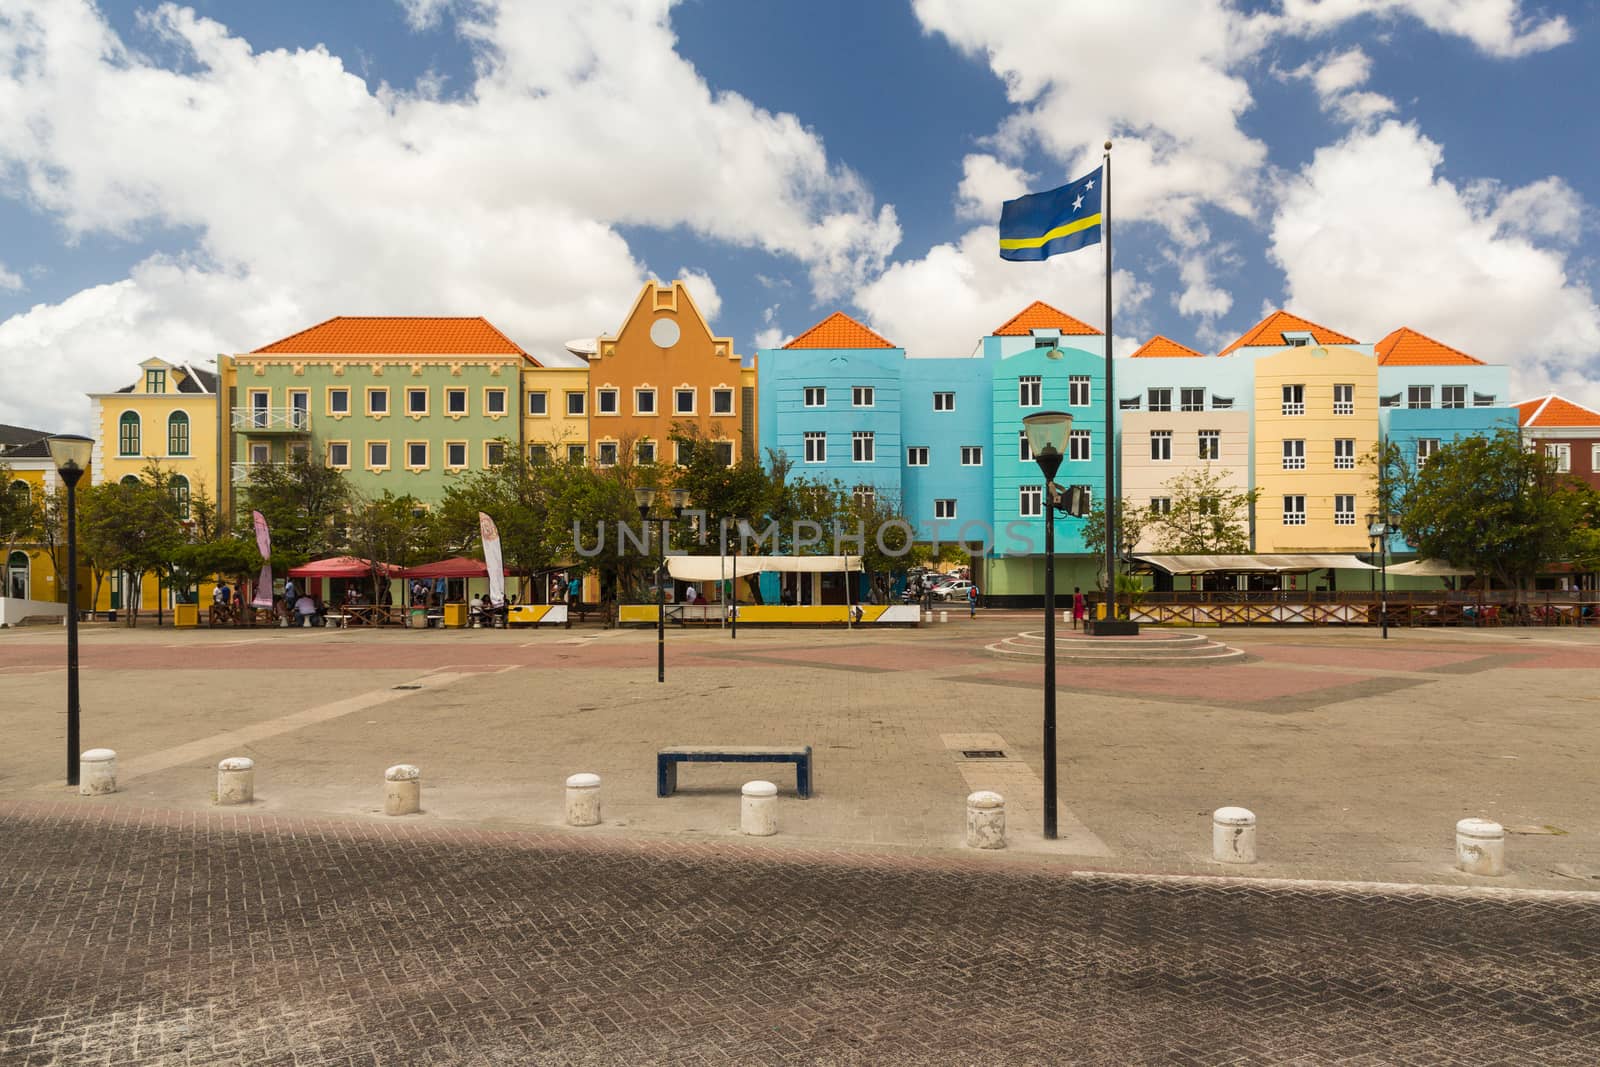 Dutch Antilles of Curacao and the city of Willemstad